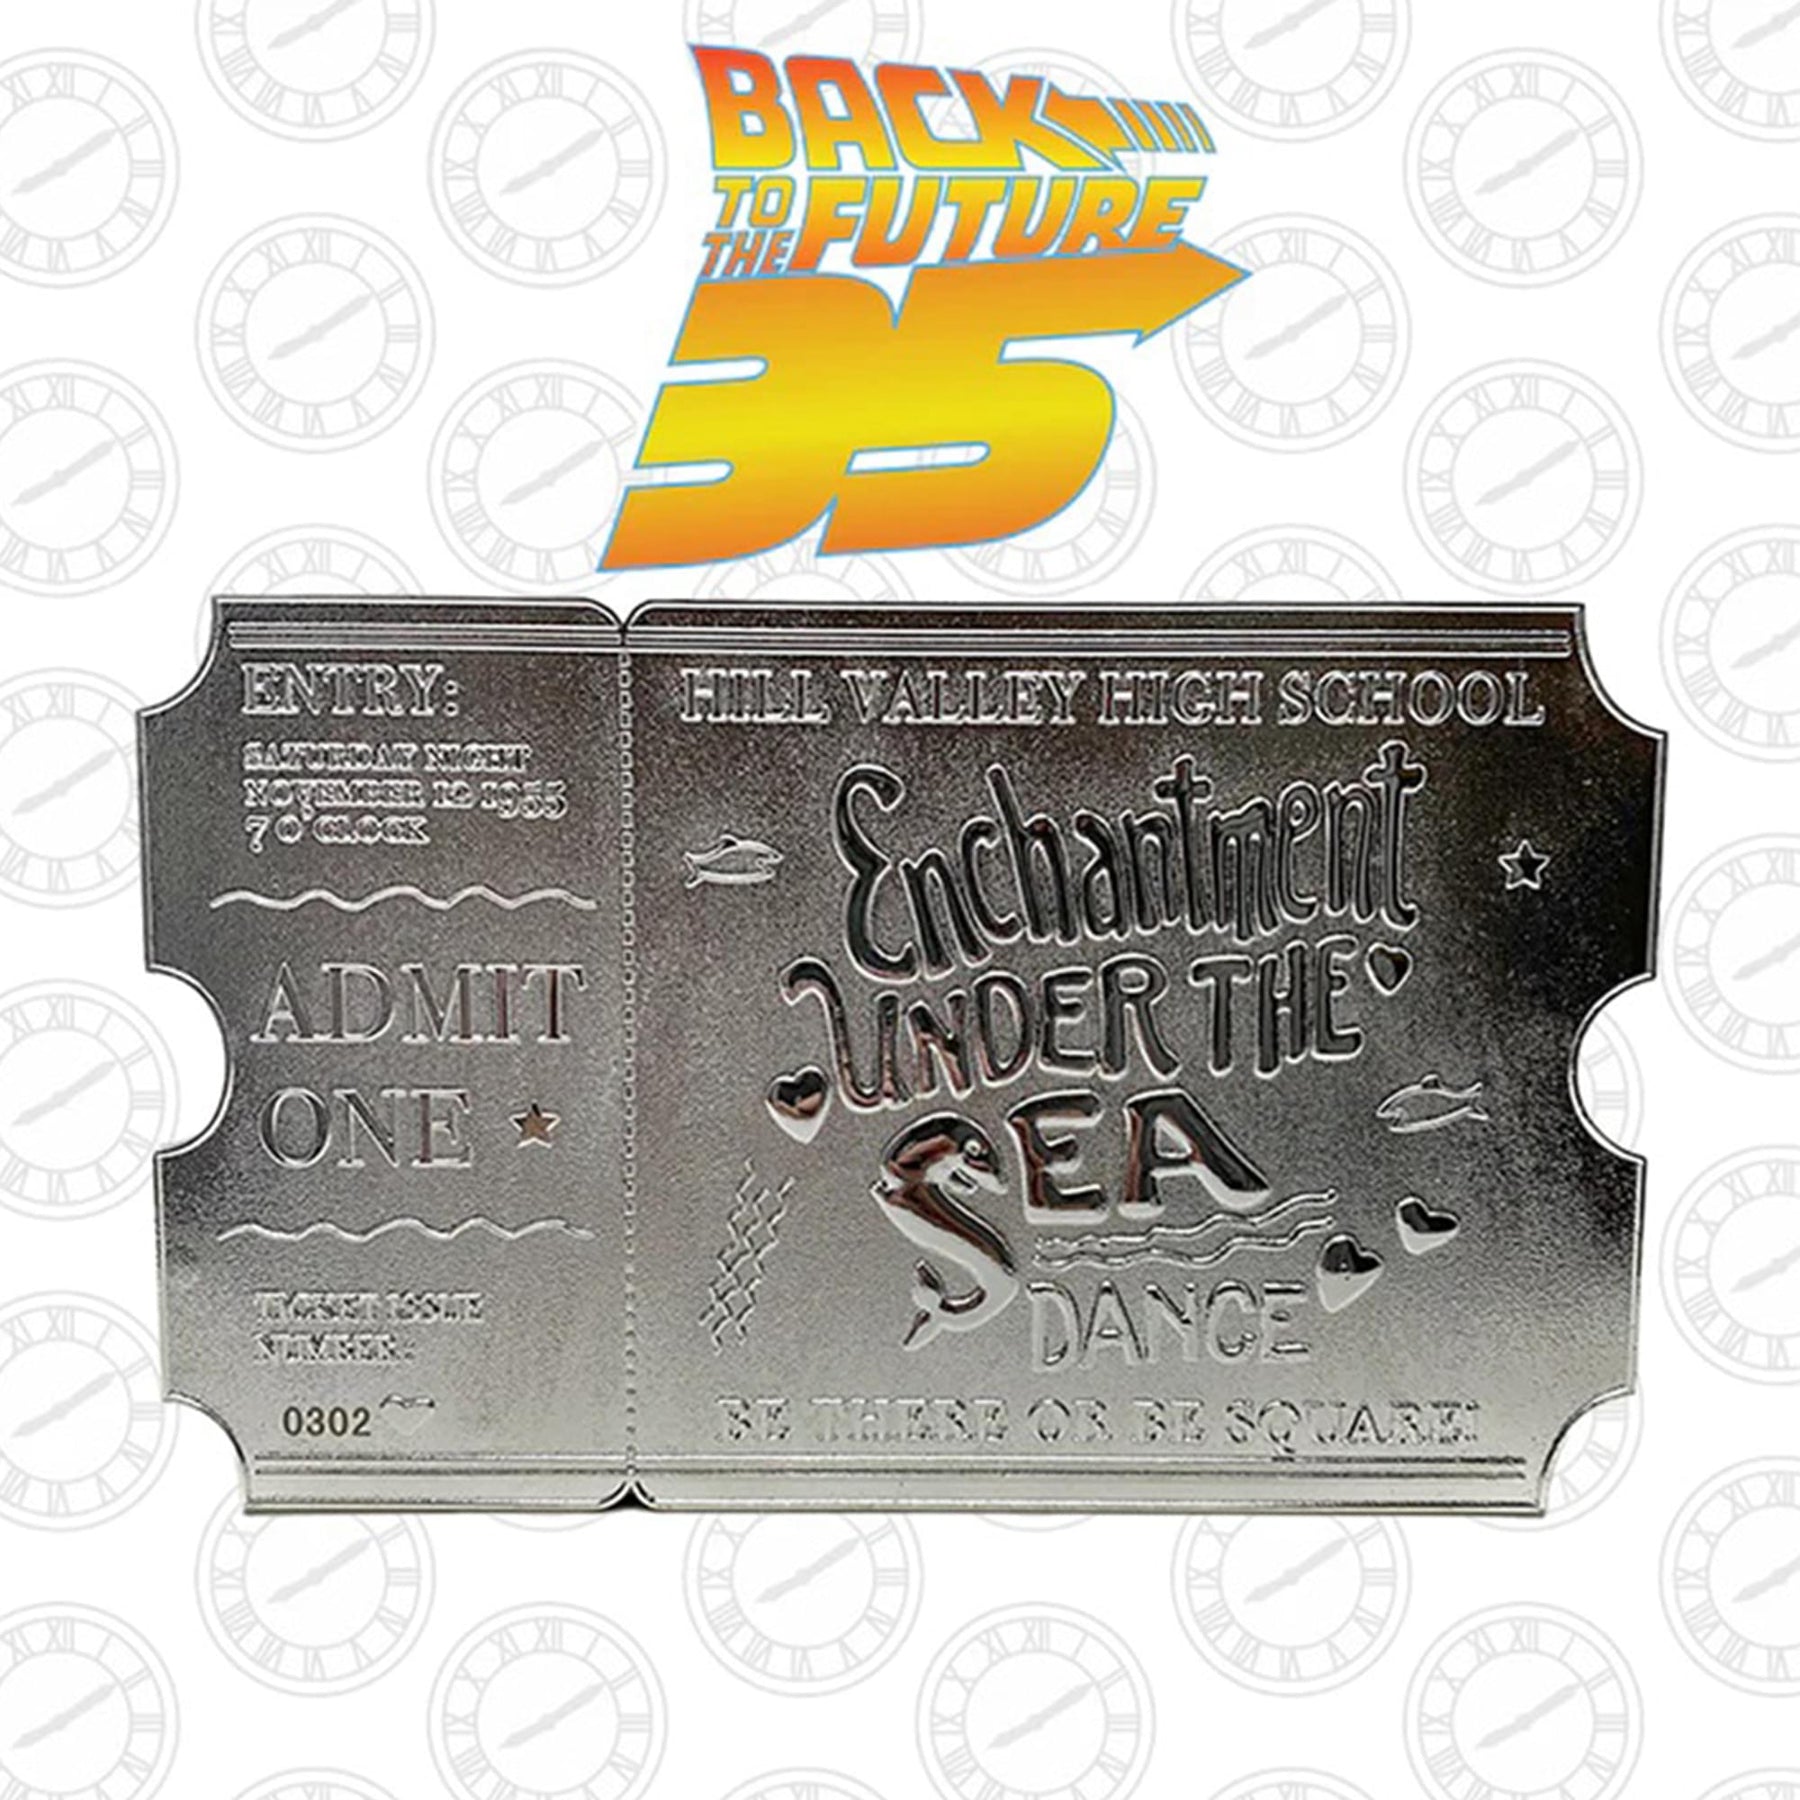 Back To The Future Limited Edition .999 Silver Plated Under the Sea Dance Ticket